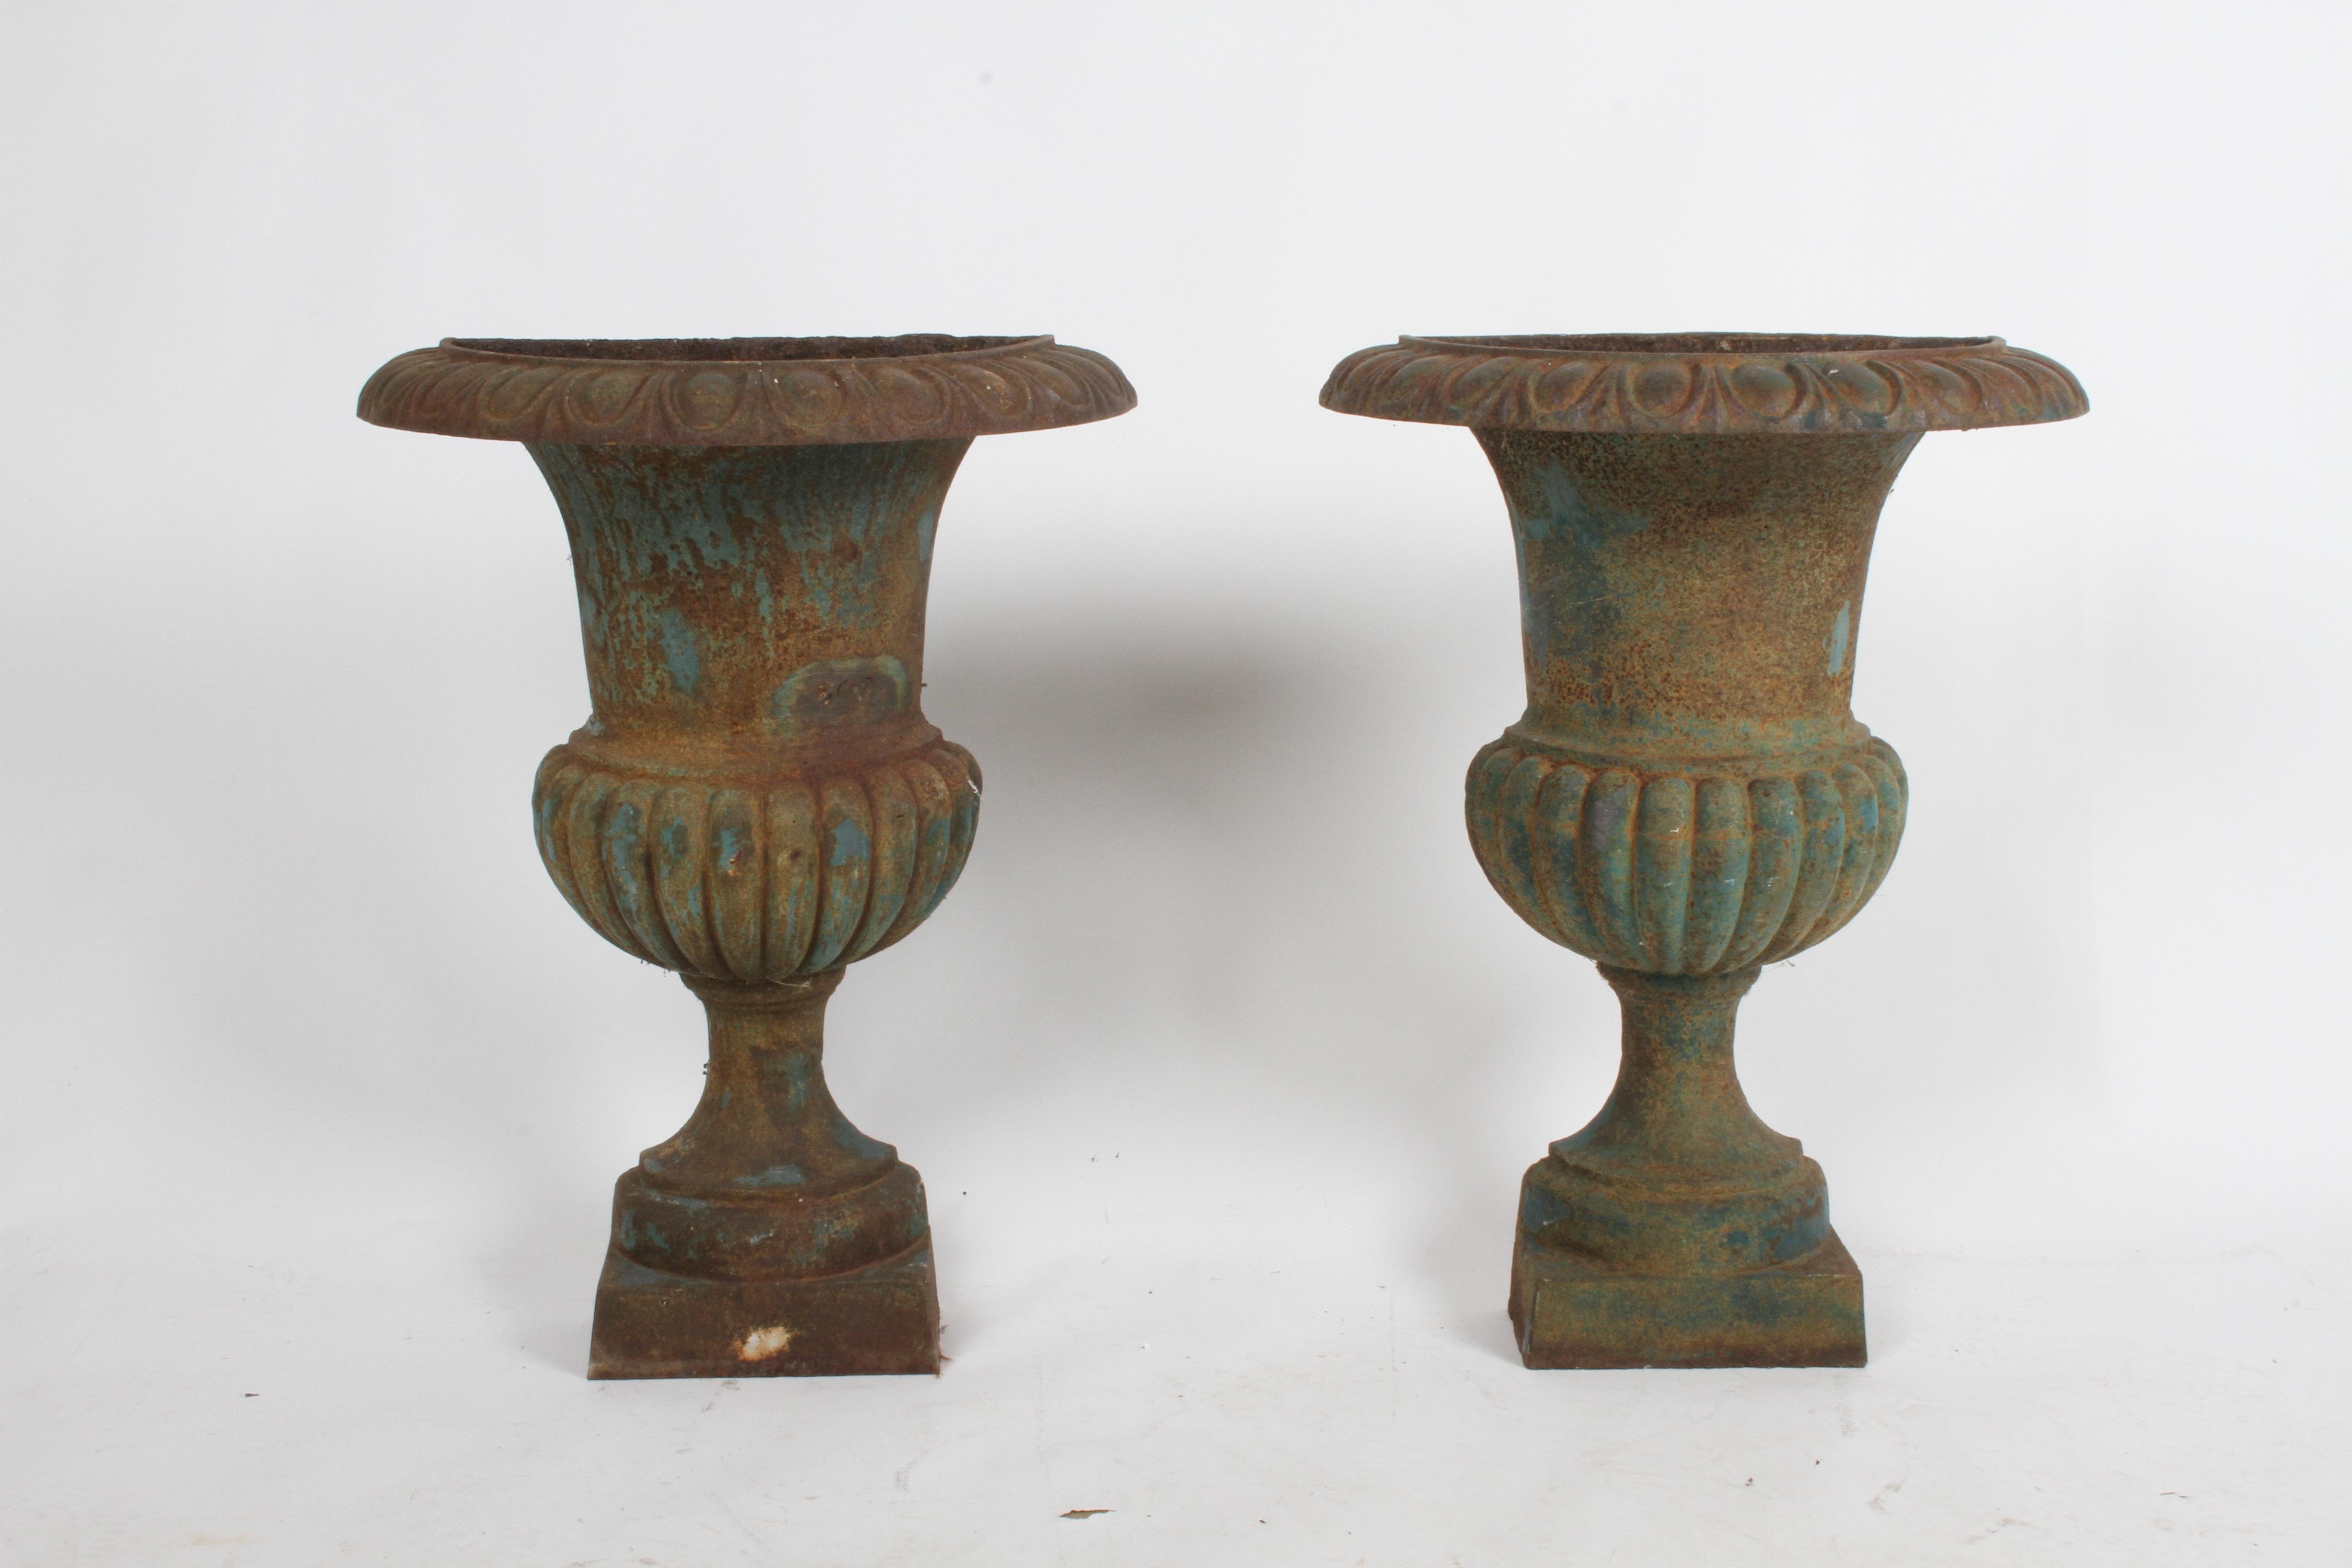 Pair of unusual early 20th century antique French cast iron half round demilune wall mounted urn form wall planters. Having traces of blue paint, egg and dart pattern with classical quarter-lobed body on plinth base. Overall rust, very heavy no